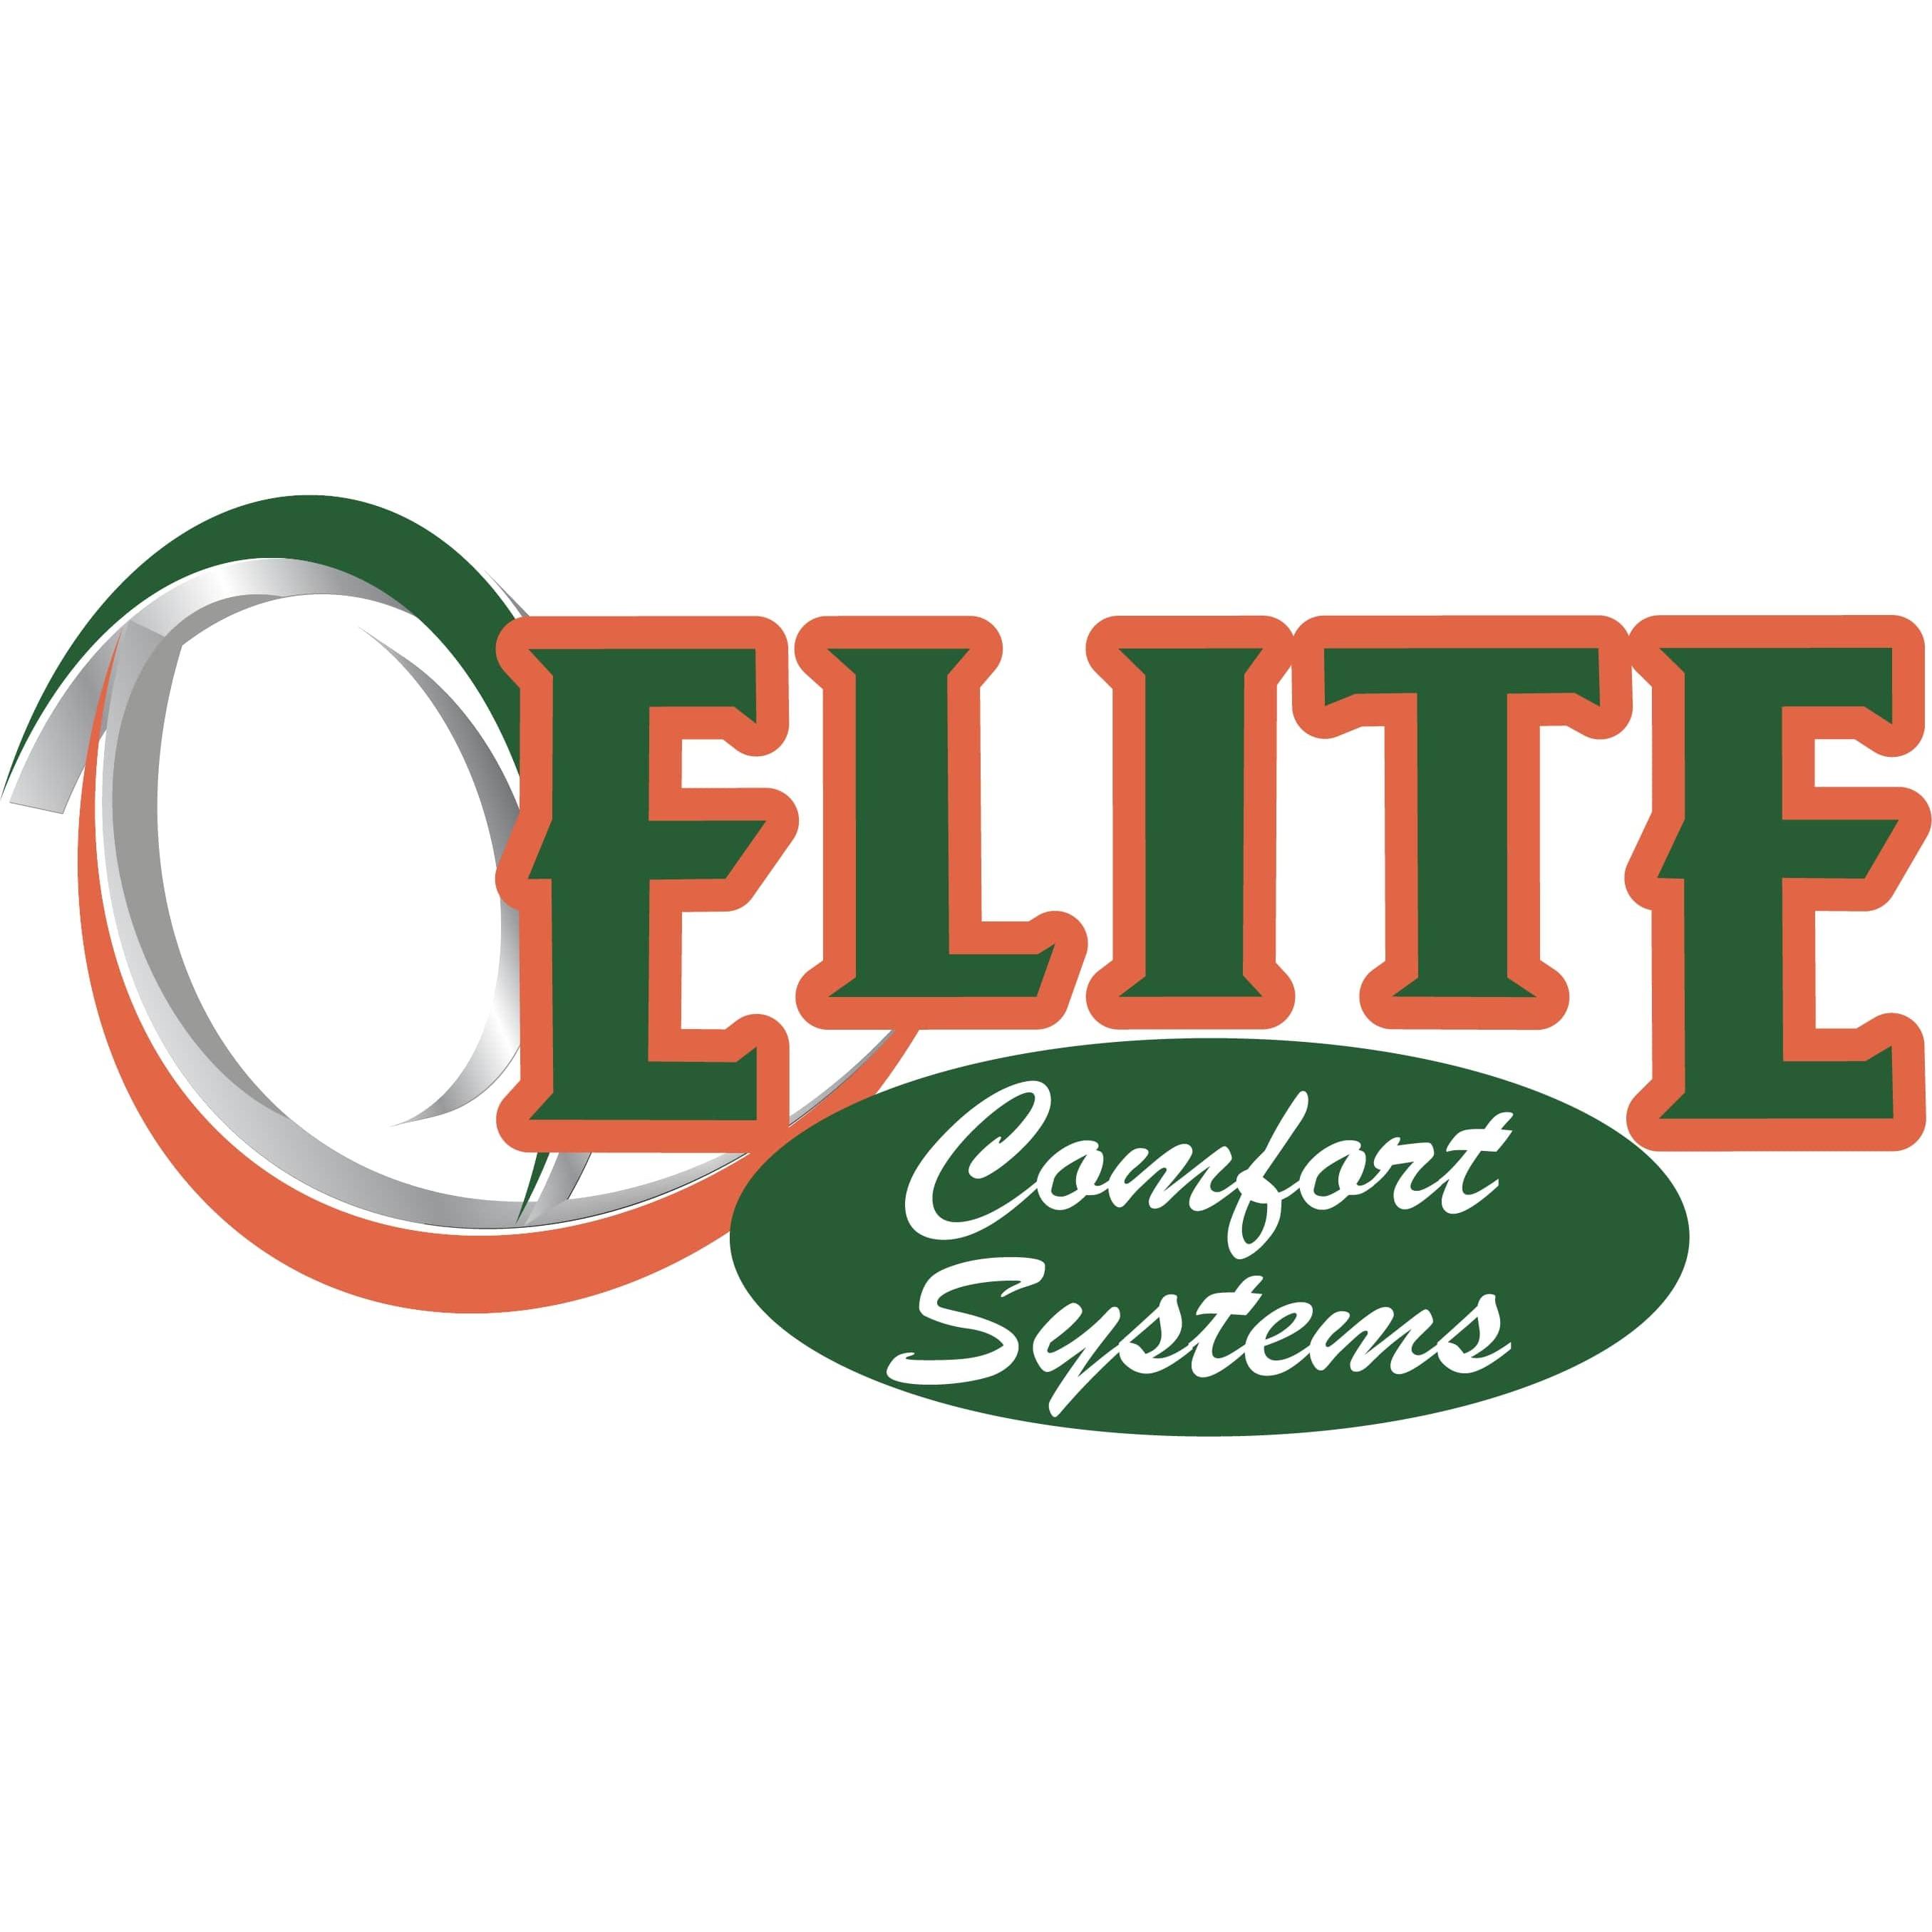 Elite Comfort Systems - Brentwood, CA 94513 - (925)319-6848 | ShowMeLocal.com